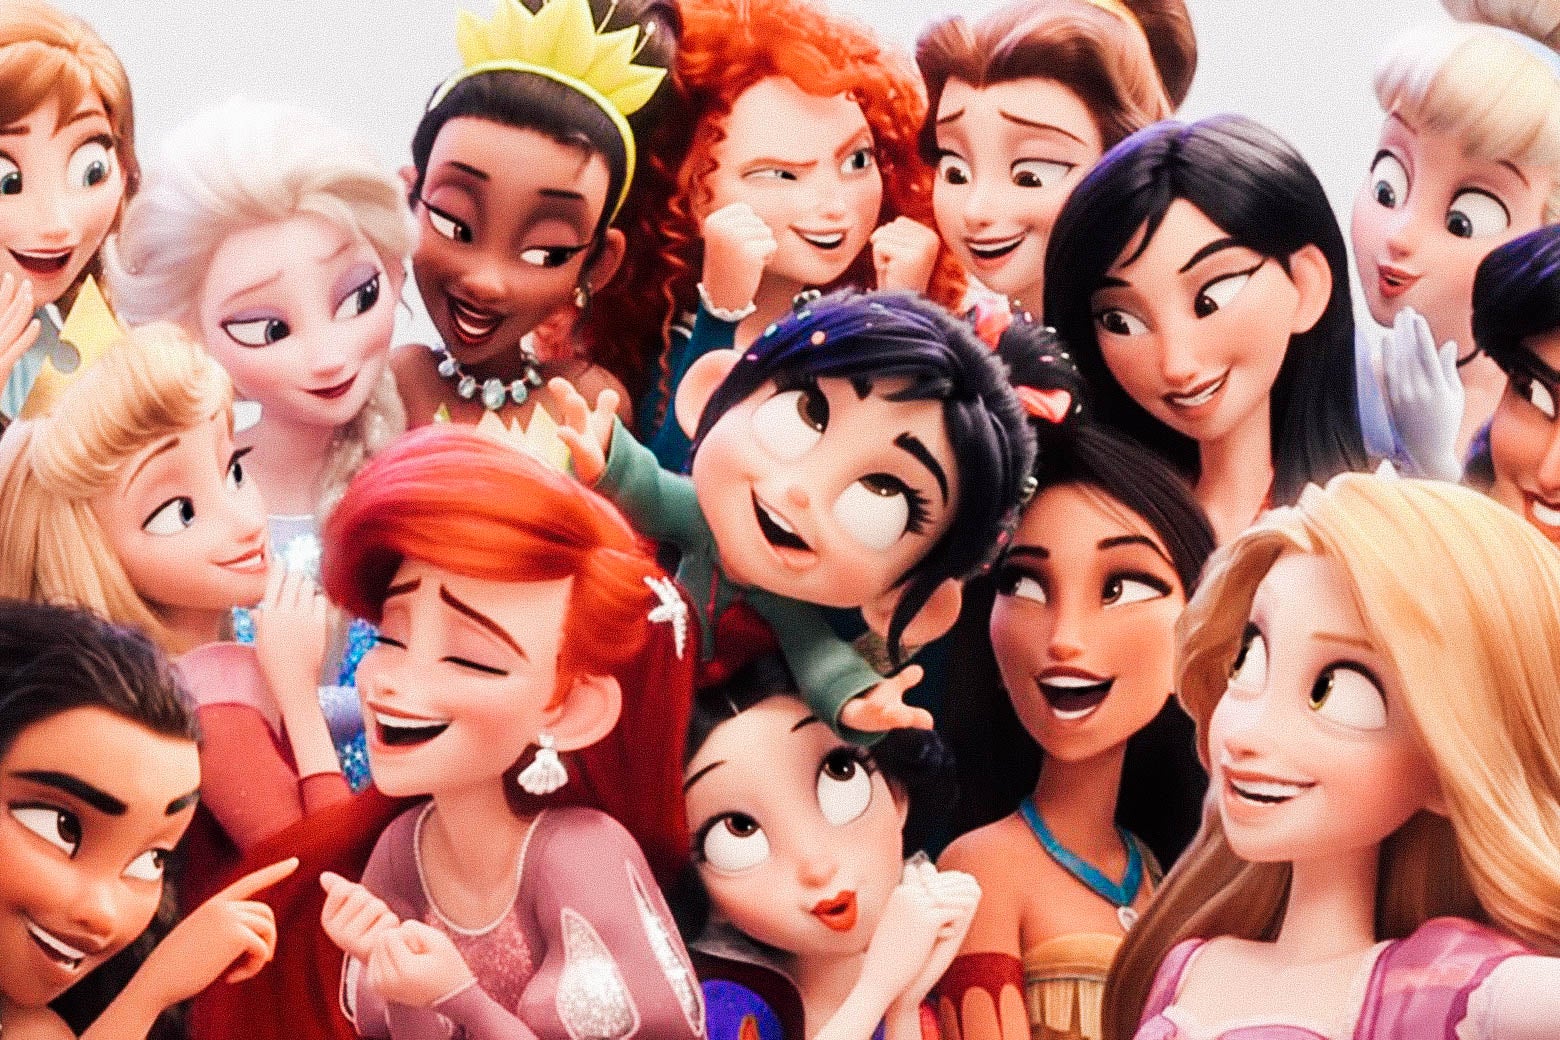 Vanellope and the Disney princesses from Ralph Breaks the Internet.